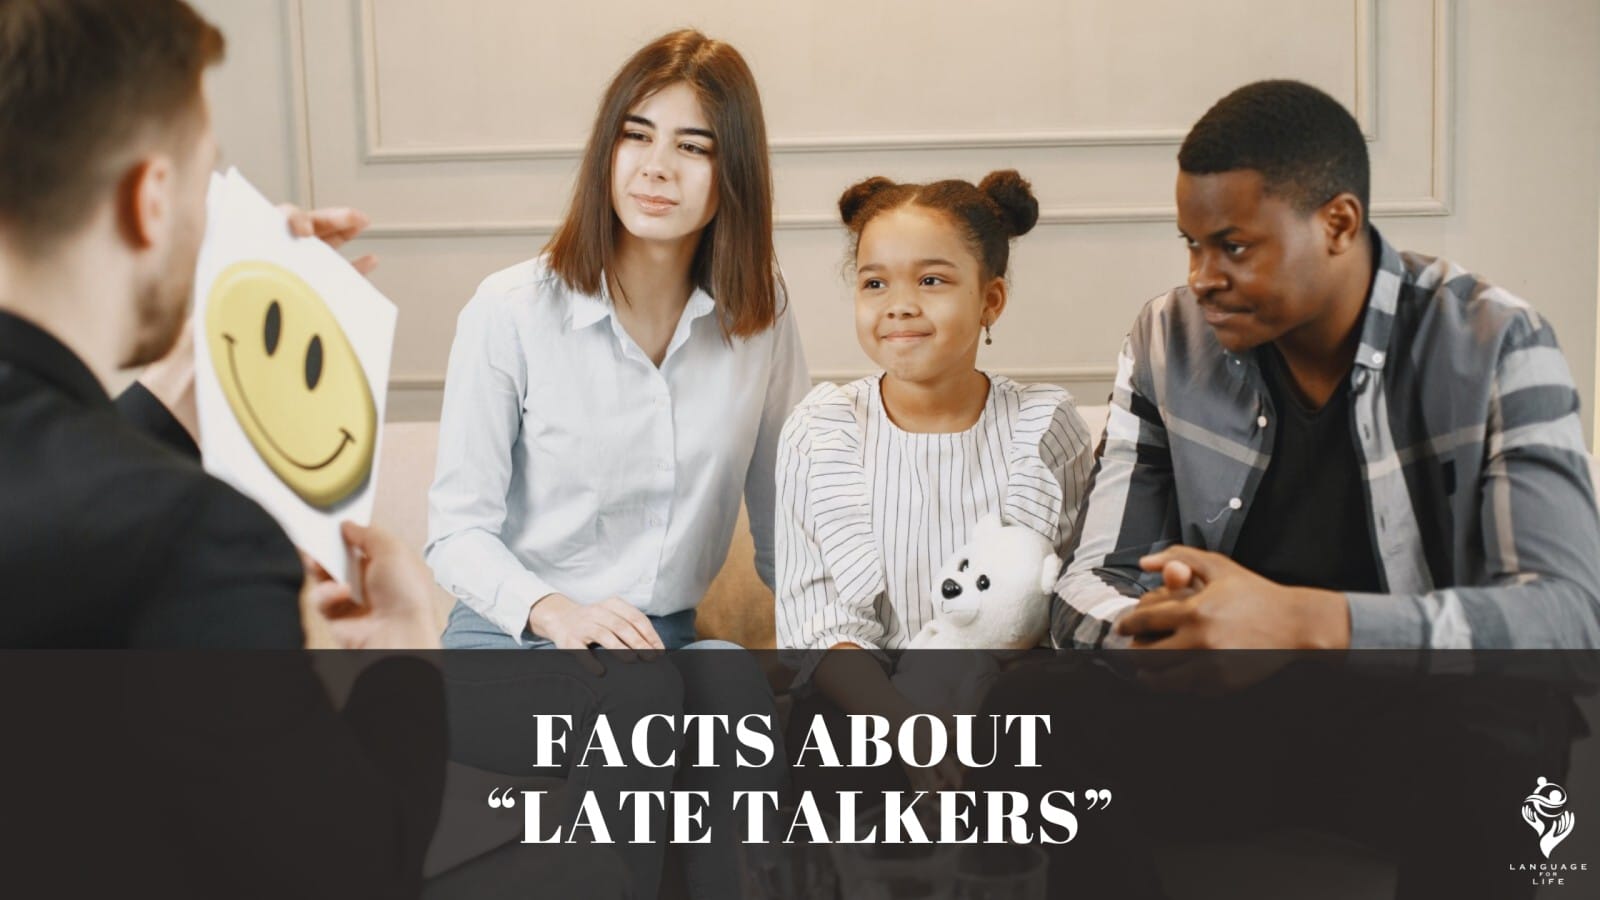 FACTS ABOUT “LATE TALKERS”